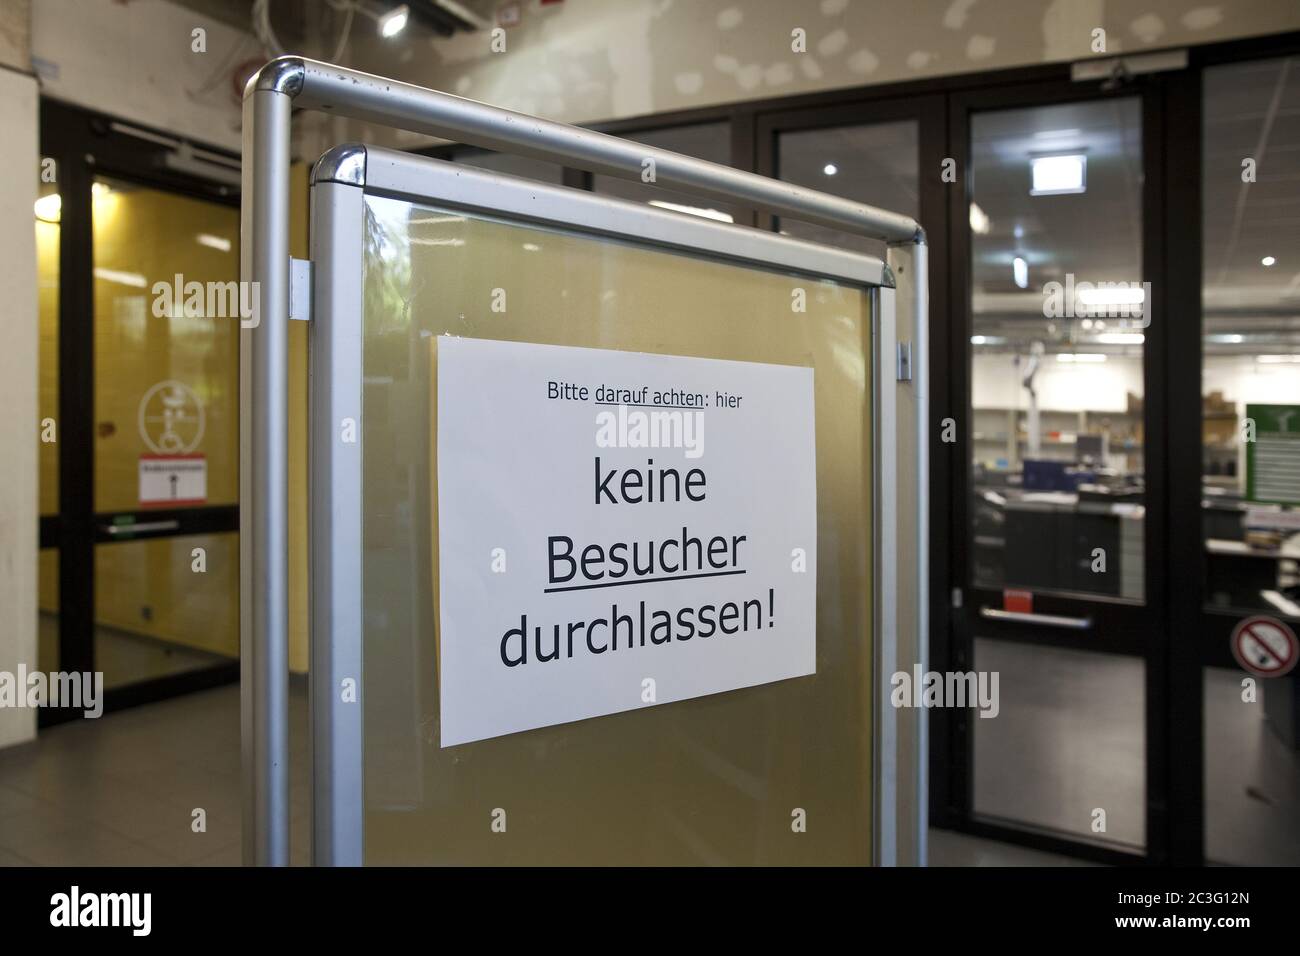 Sign No visitors let through in the district house, Coronavirus, April 2020, Siegburg, Germany Stock Photo